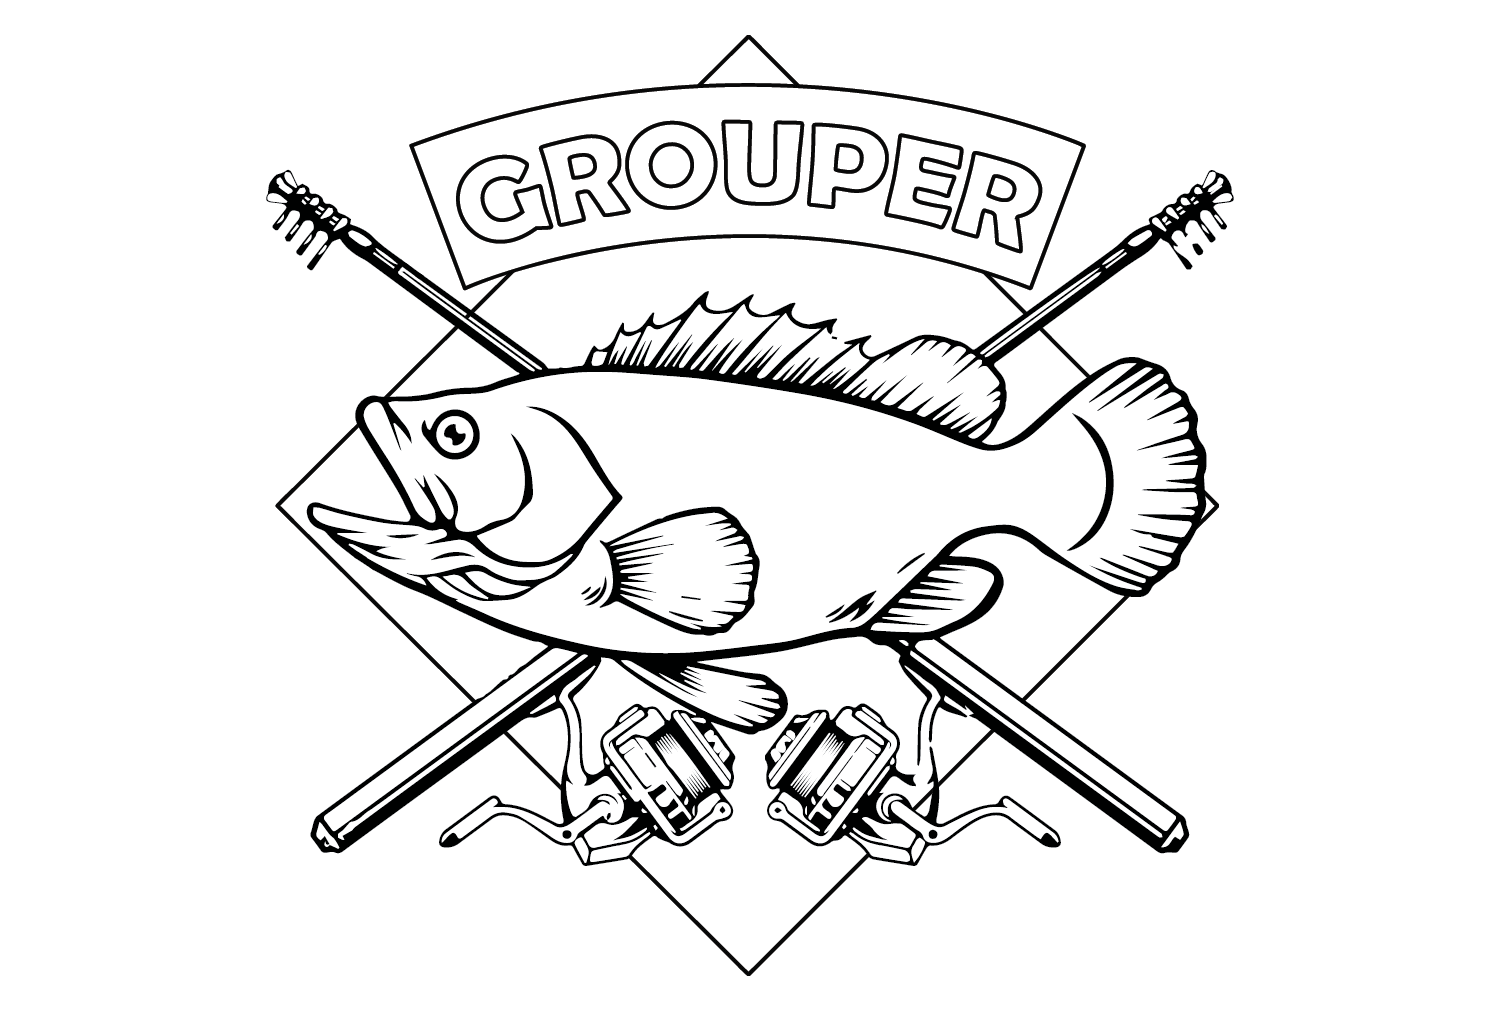 Stylized Figure Grouper from Grouper